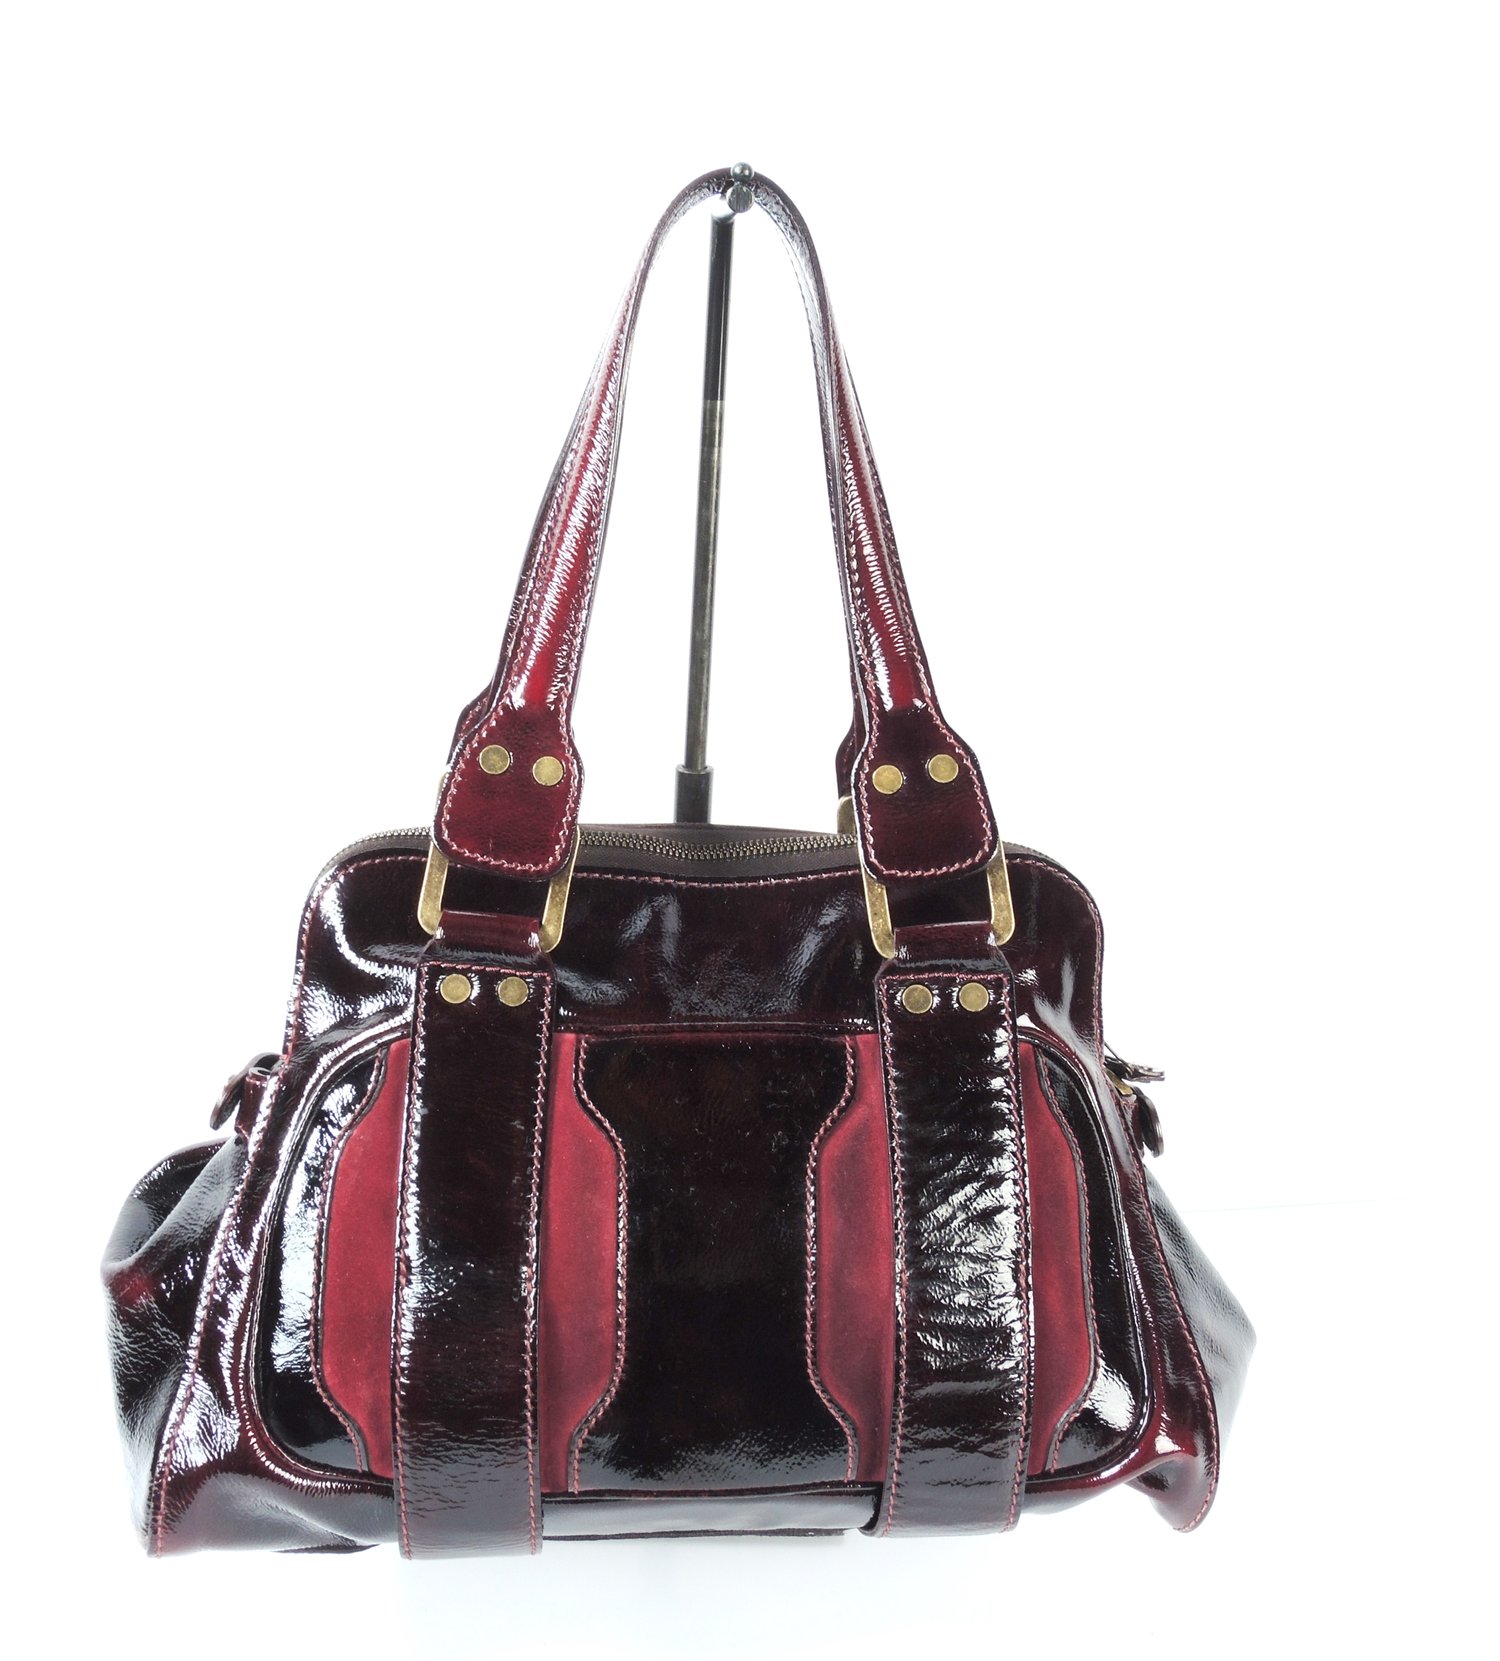 JIMMY CHOO Burgundy Patent and Suede 'Malena' Satchel